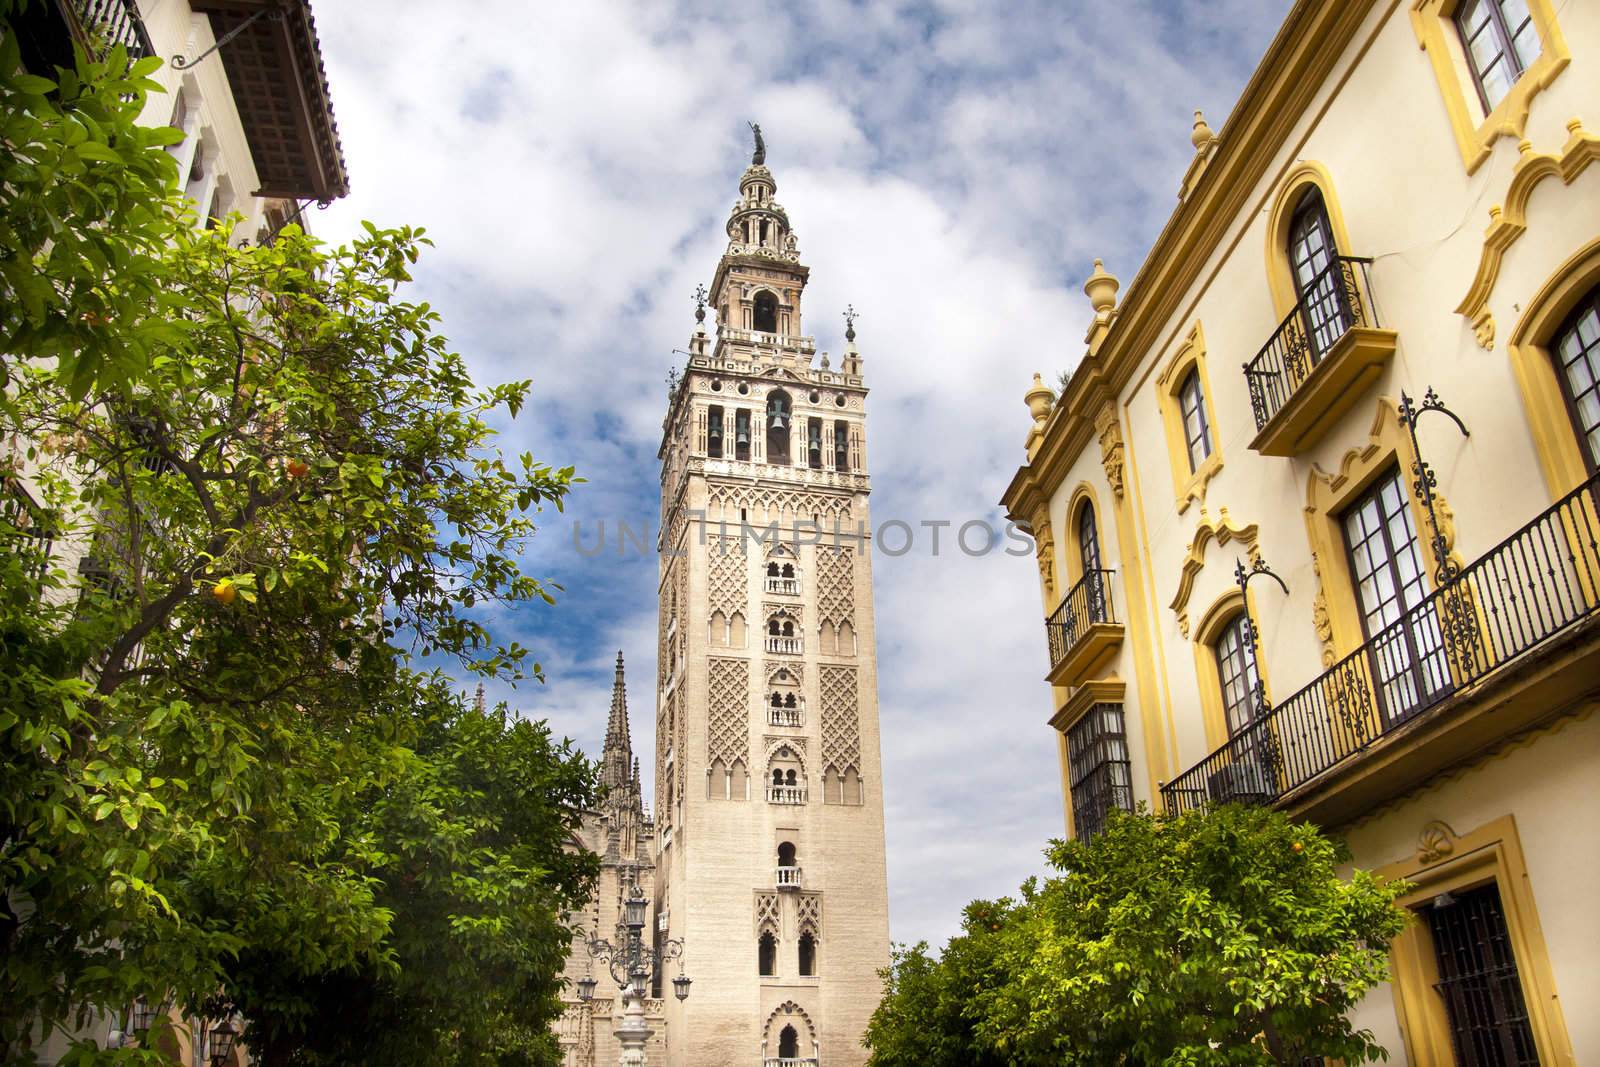 Cathedral of Seville, Spain, and the tower La giralda